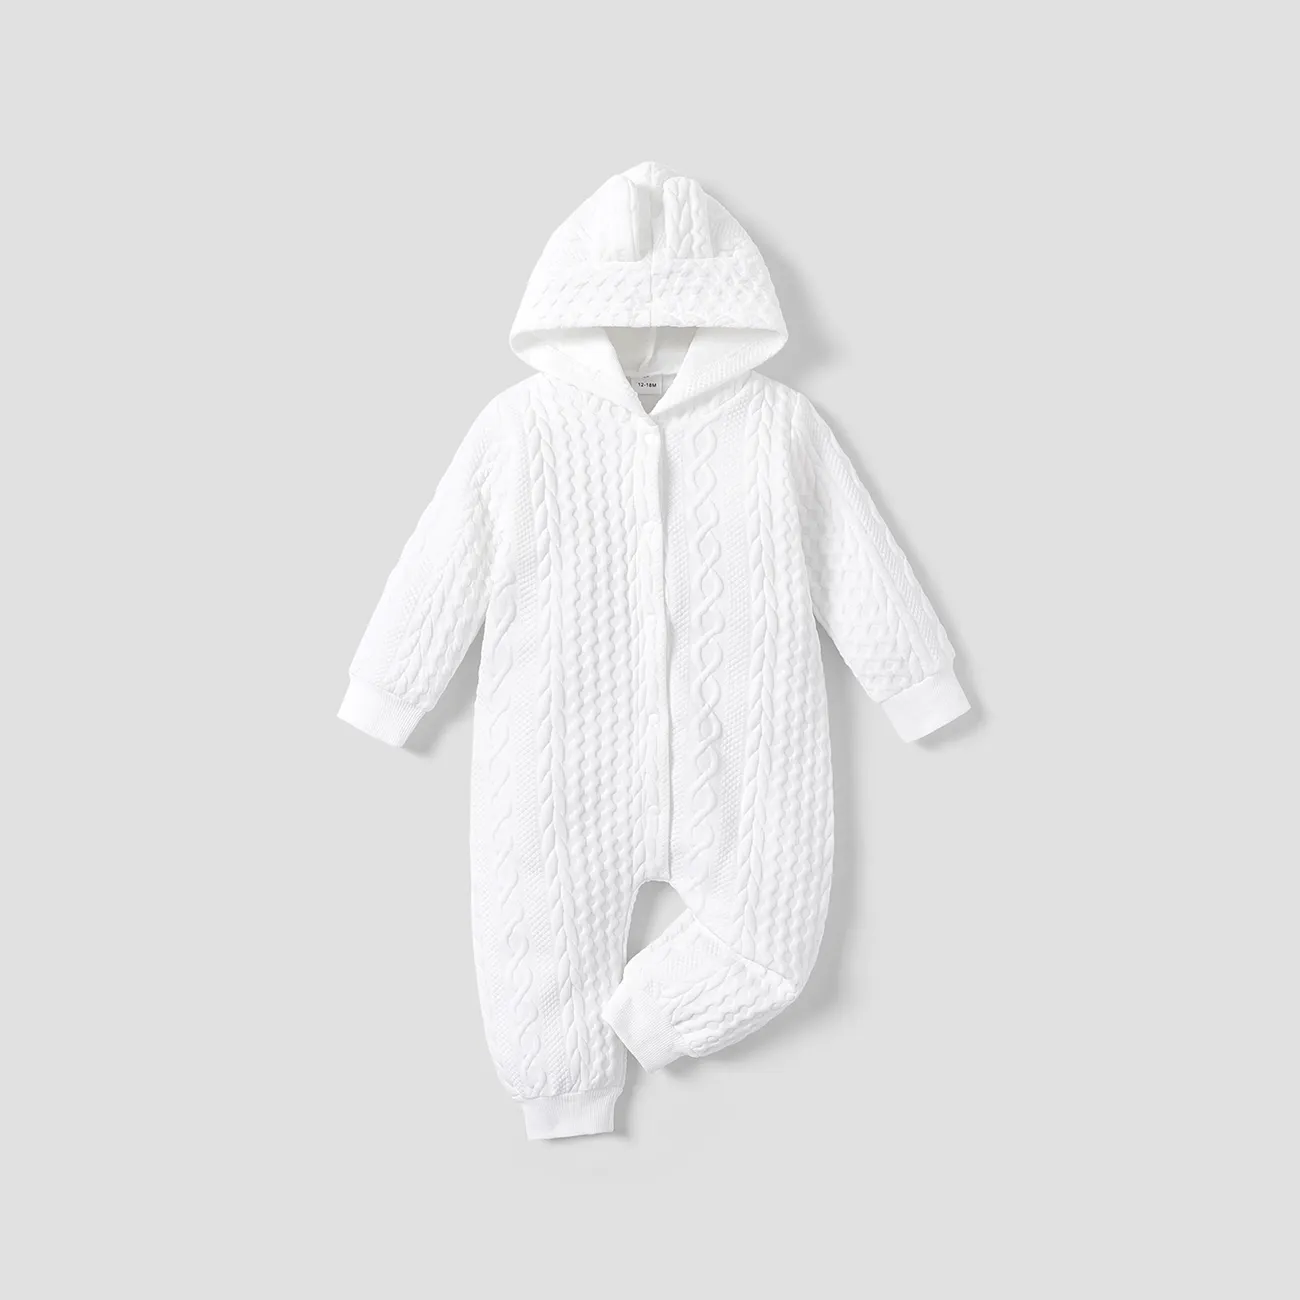 Solid Knitted Hooded Long-sleeve Pink Baby Jumpsuit White big image 1